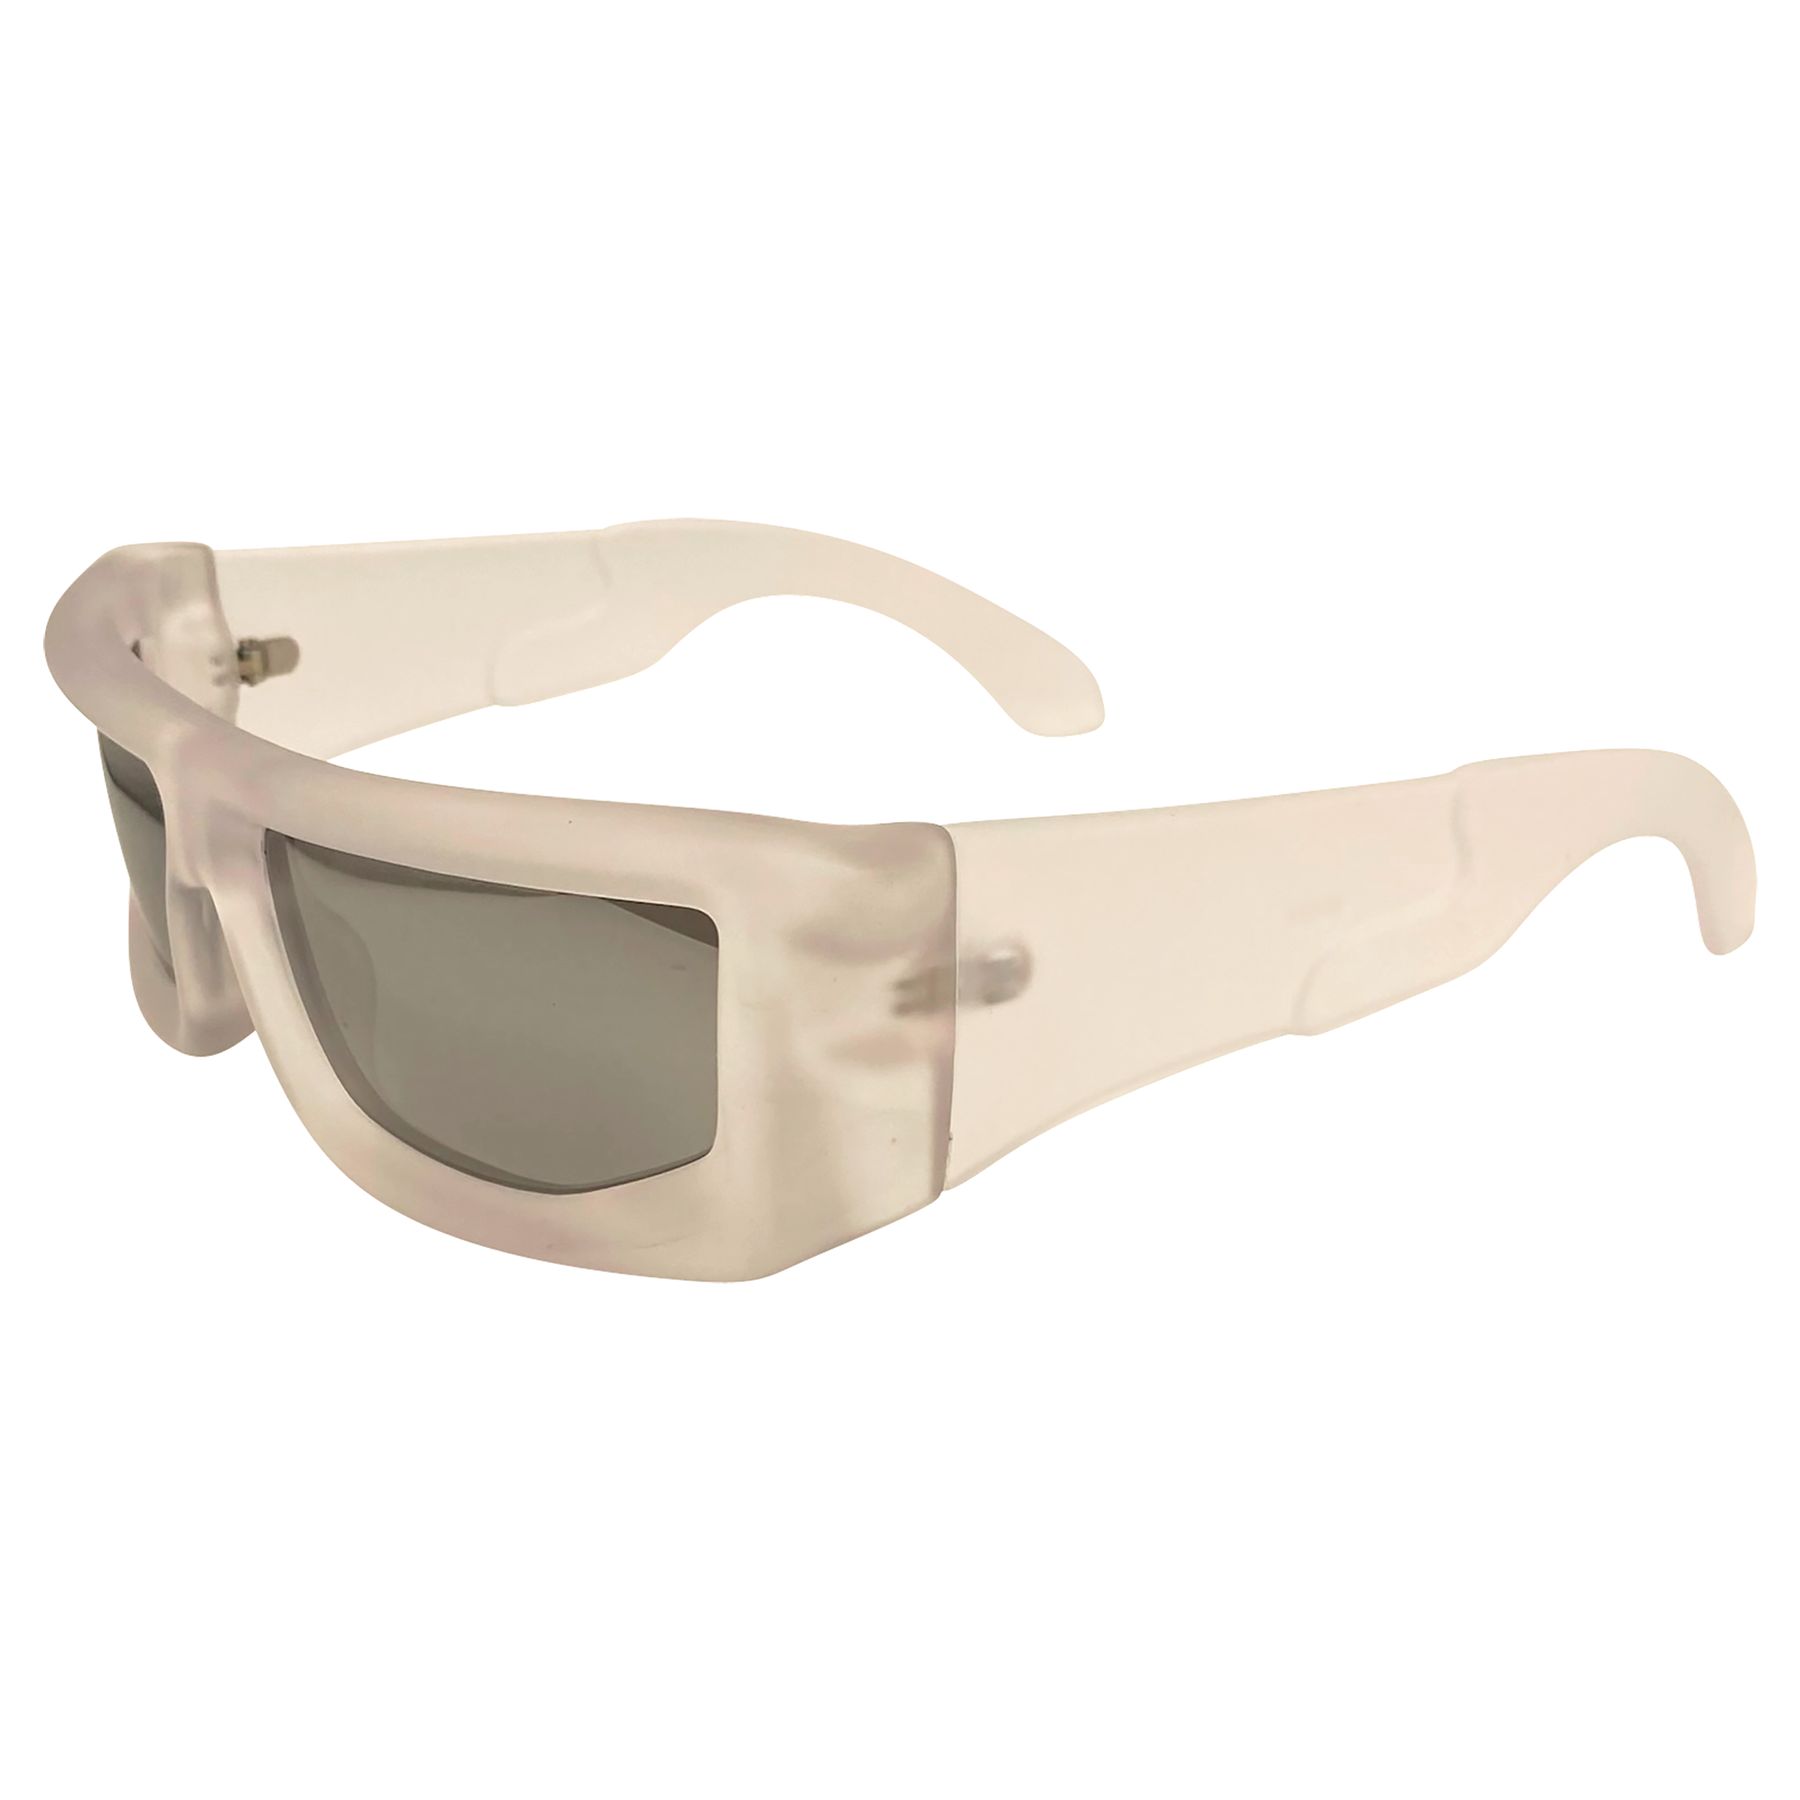 mirrored men's sunglasses with a unique frost square style frame